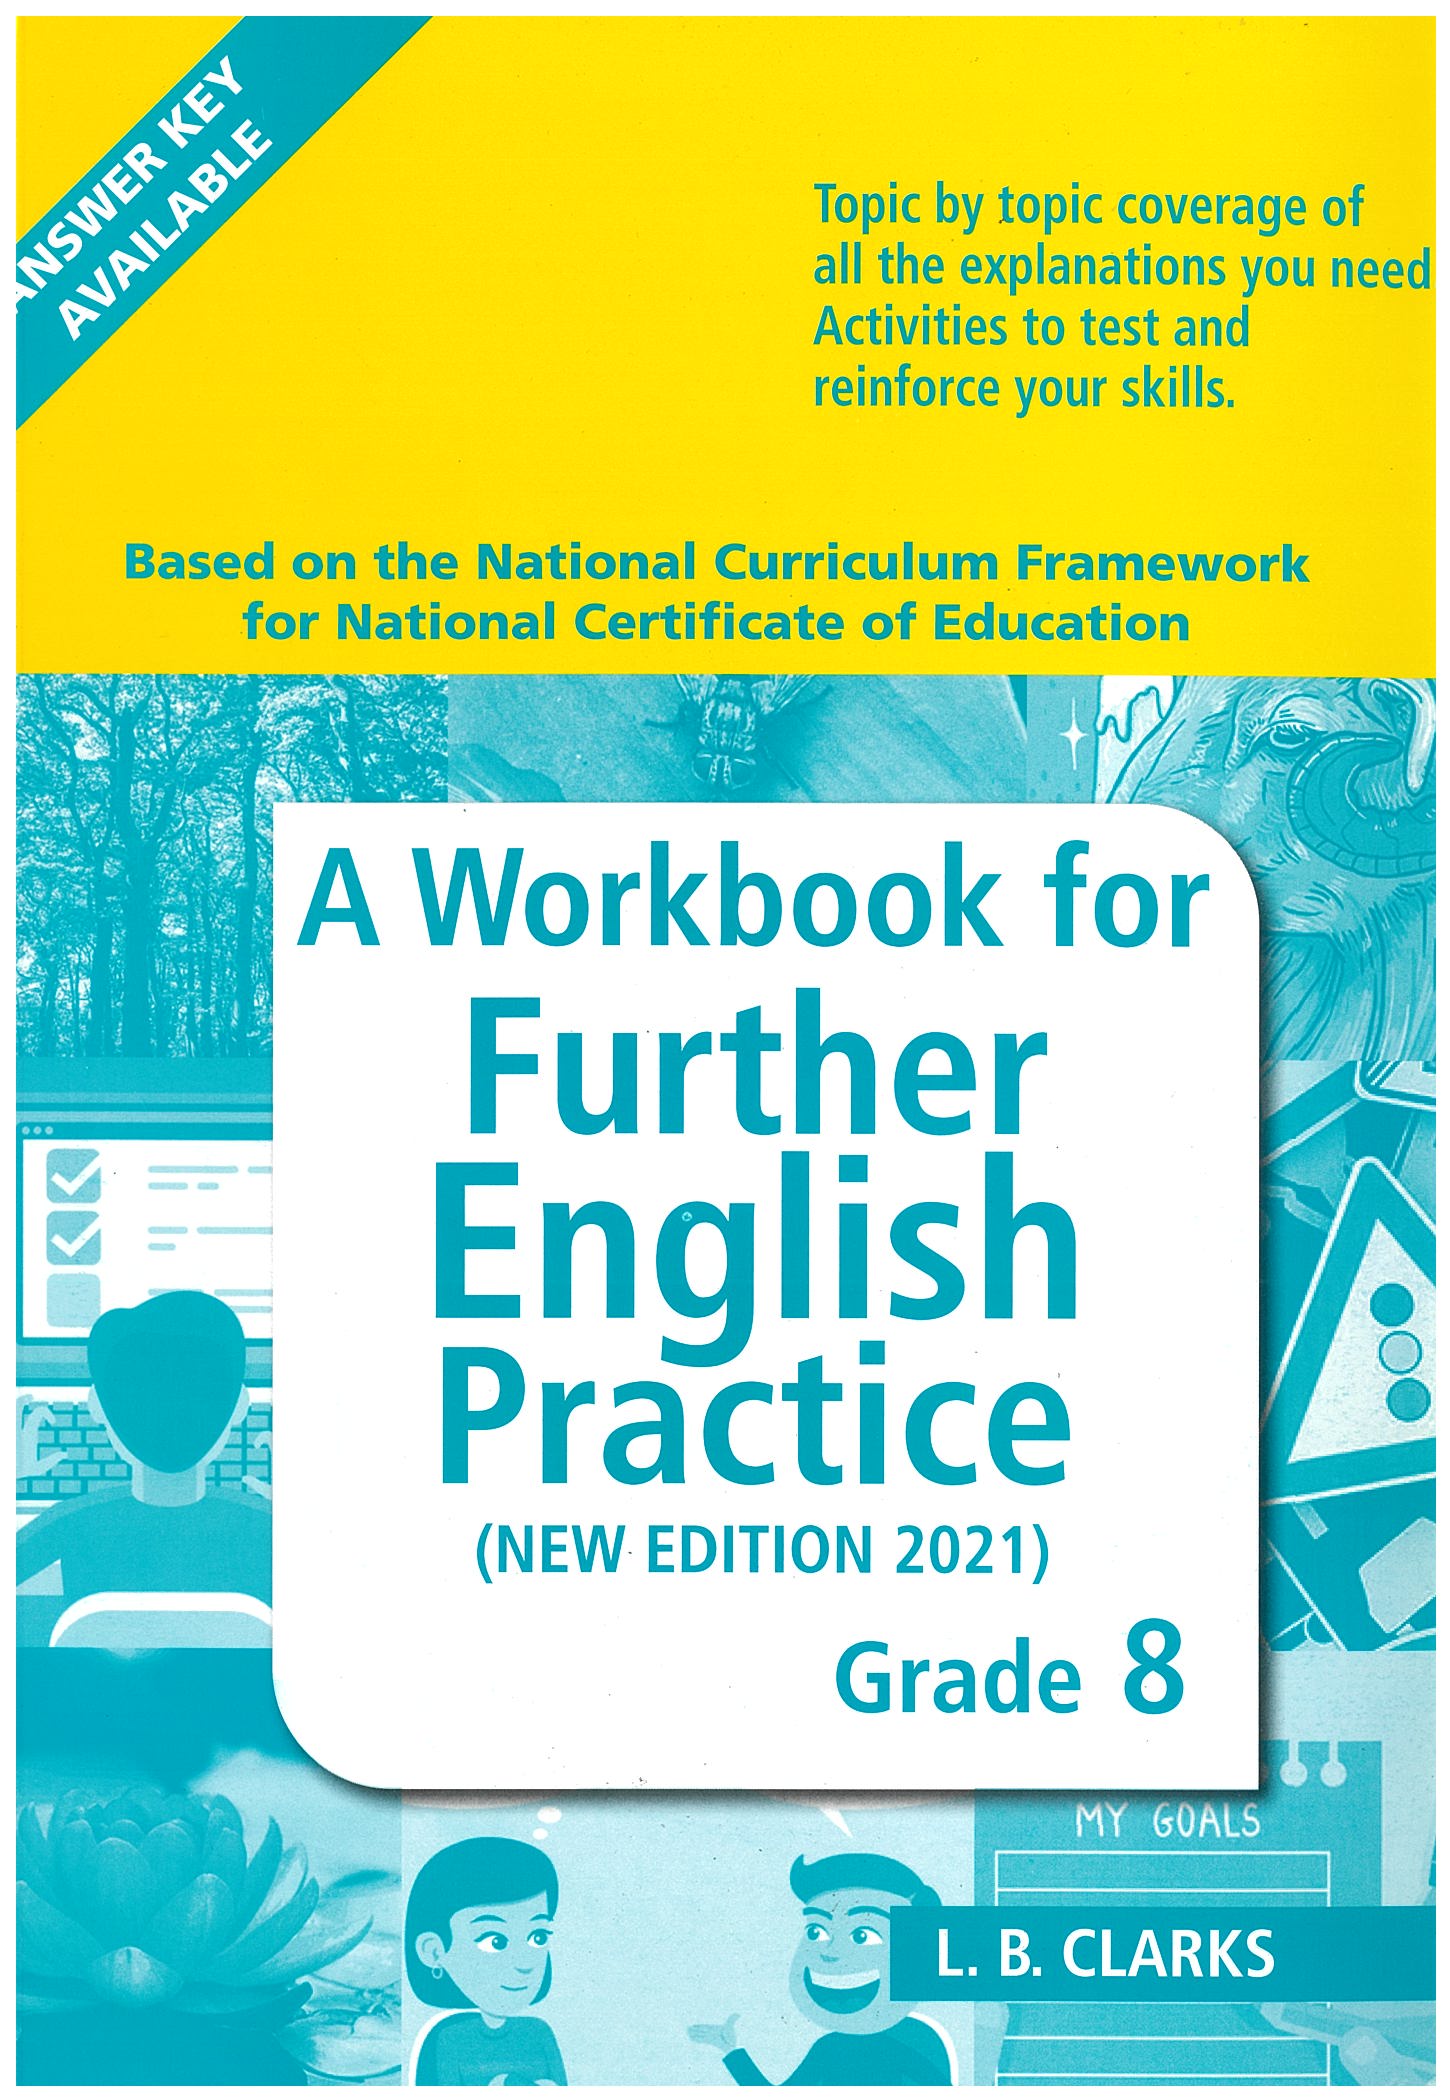 A WORKBOOK FOR FURTHER ENGLISH PRACTICE BOOK GRADE 8  ED.2021 - L.B.CLARKS